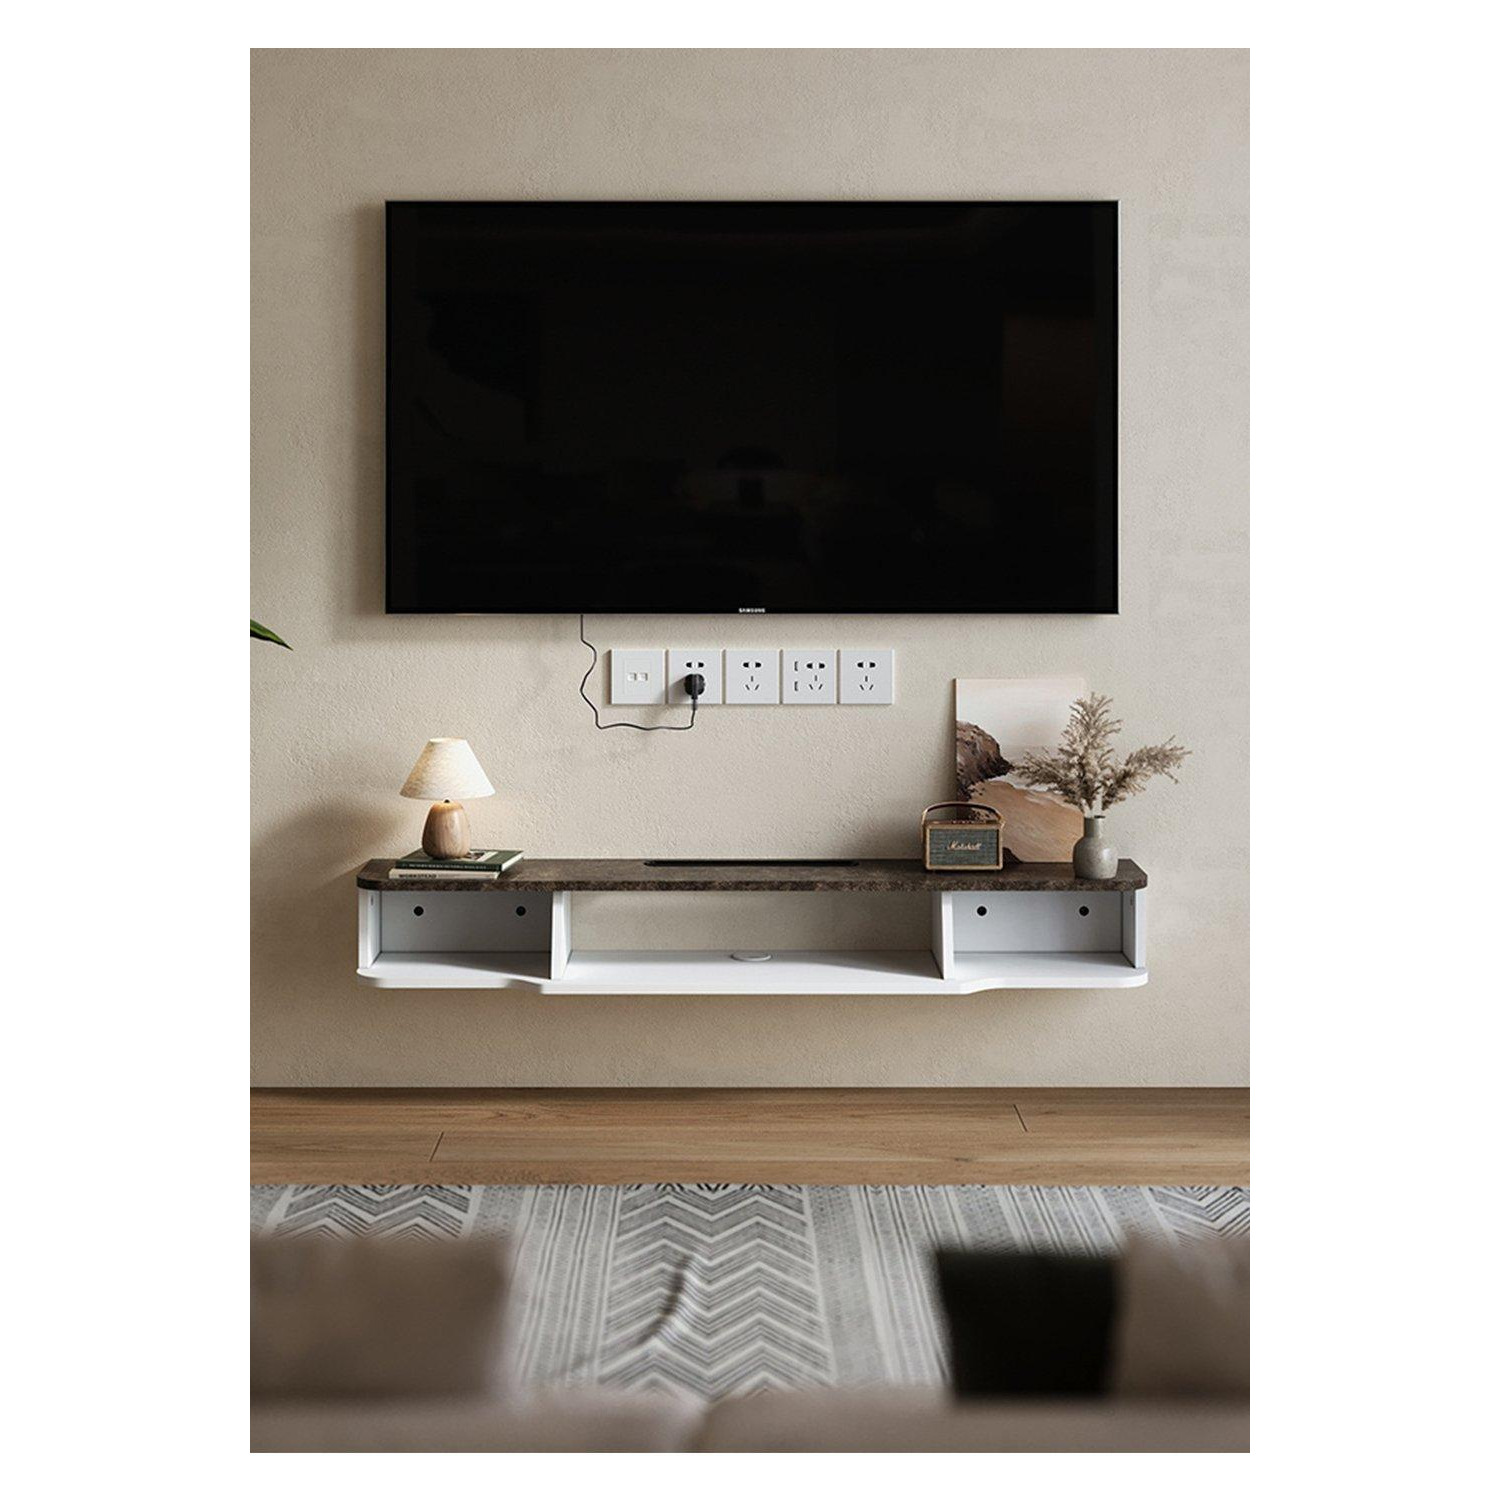 Floating TV Stand Wall Mounted TV Shelves Storage for Living Room - image 1